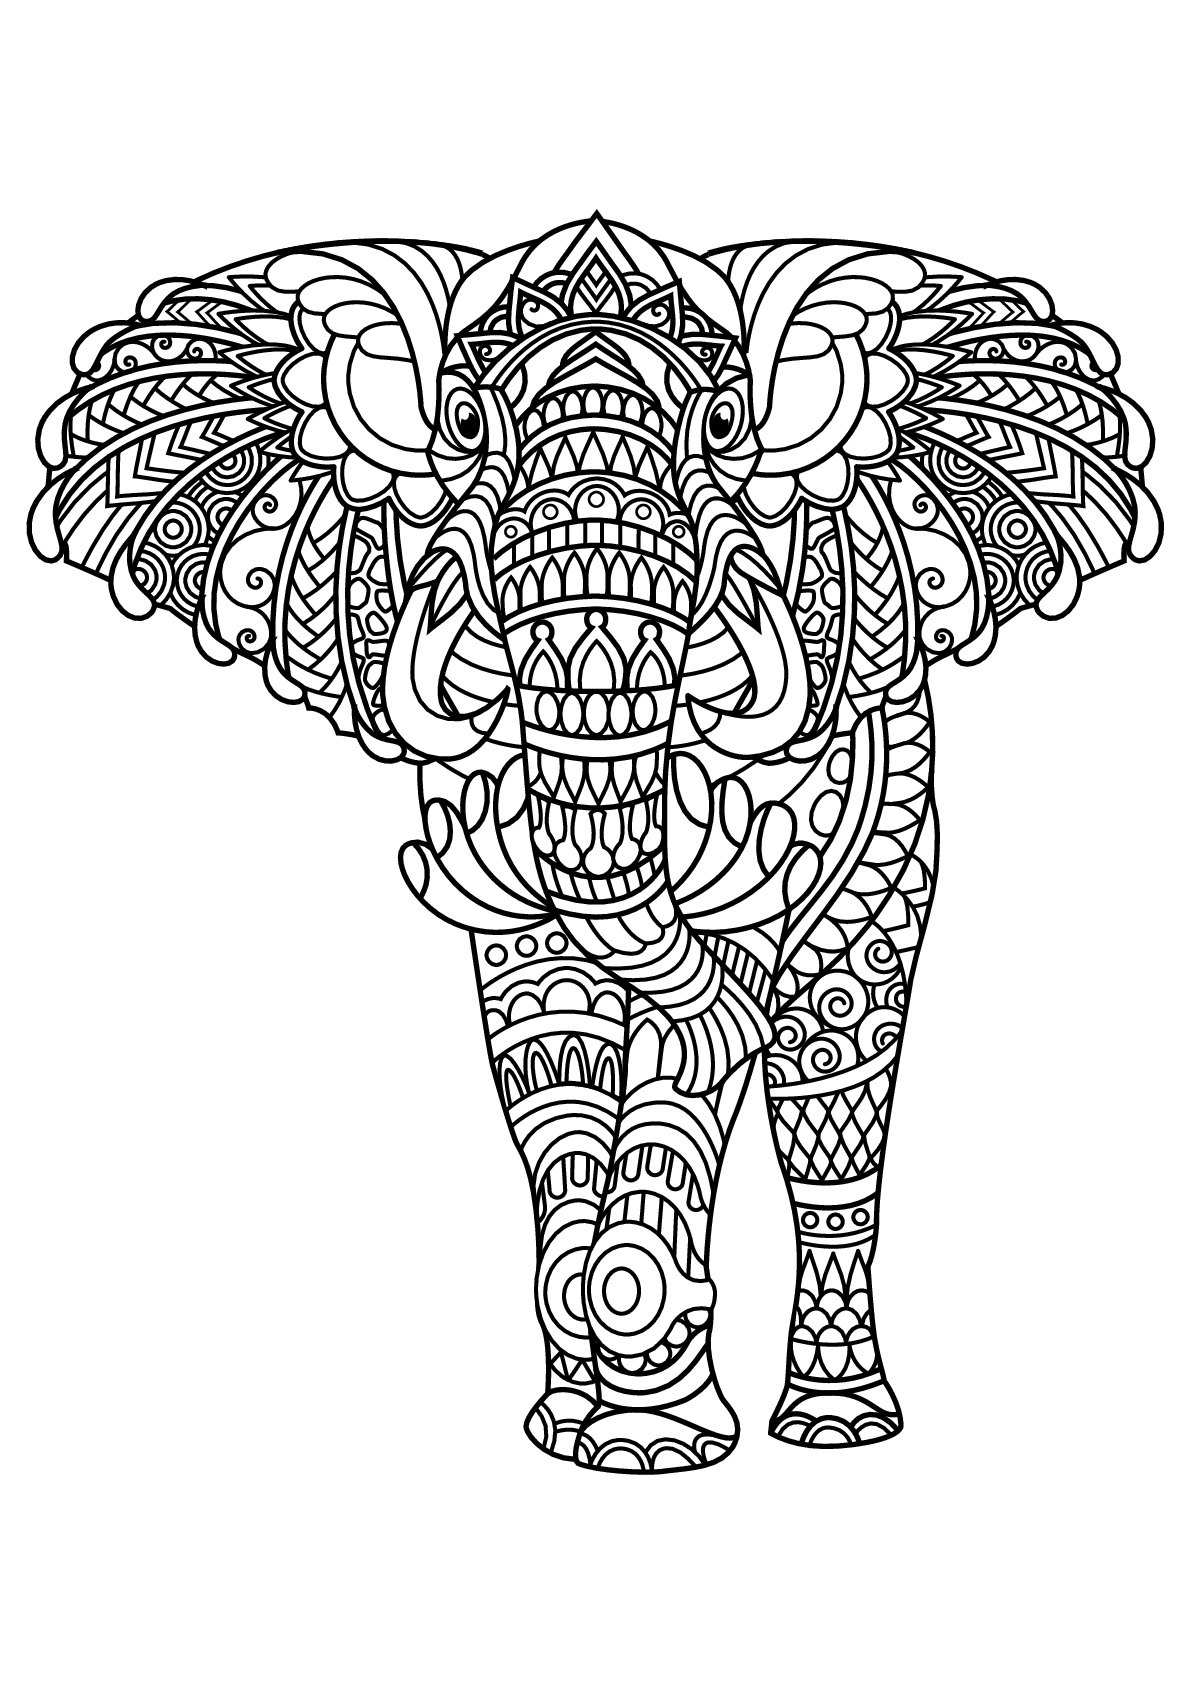 Elephant, with complex and beautiful patterns